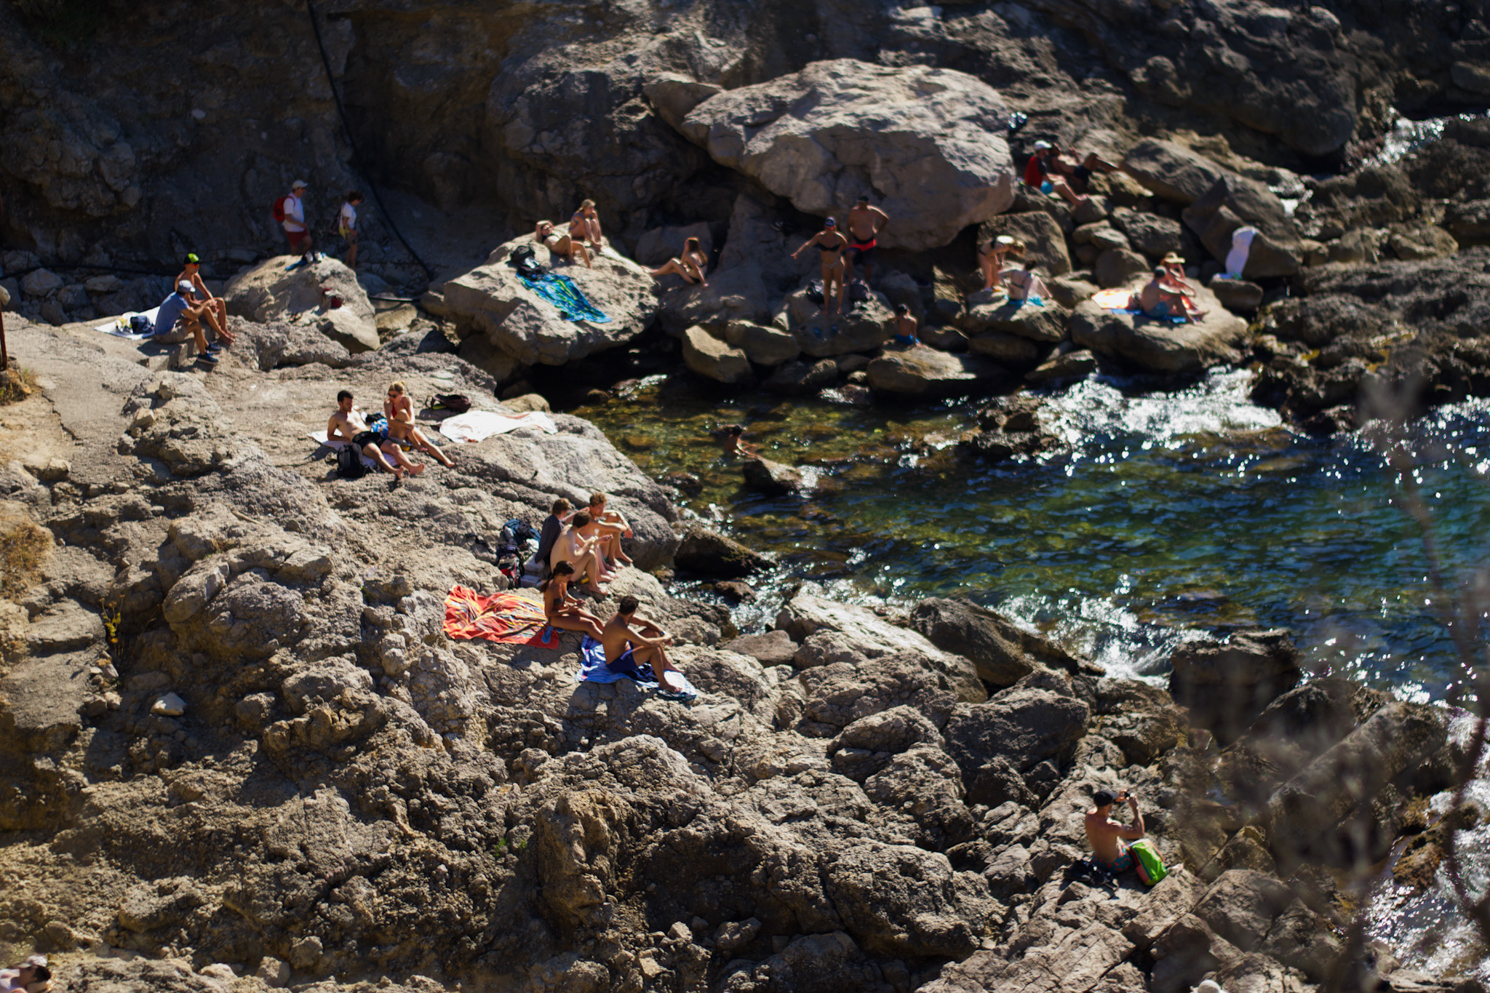 People sitting on a rocky coast facing shallow water.